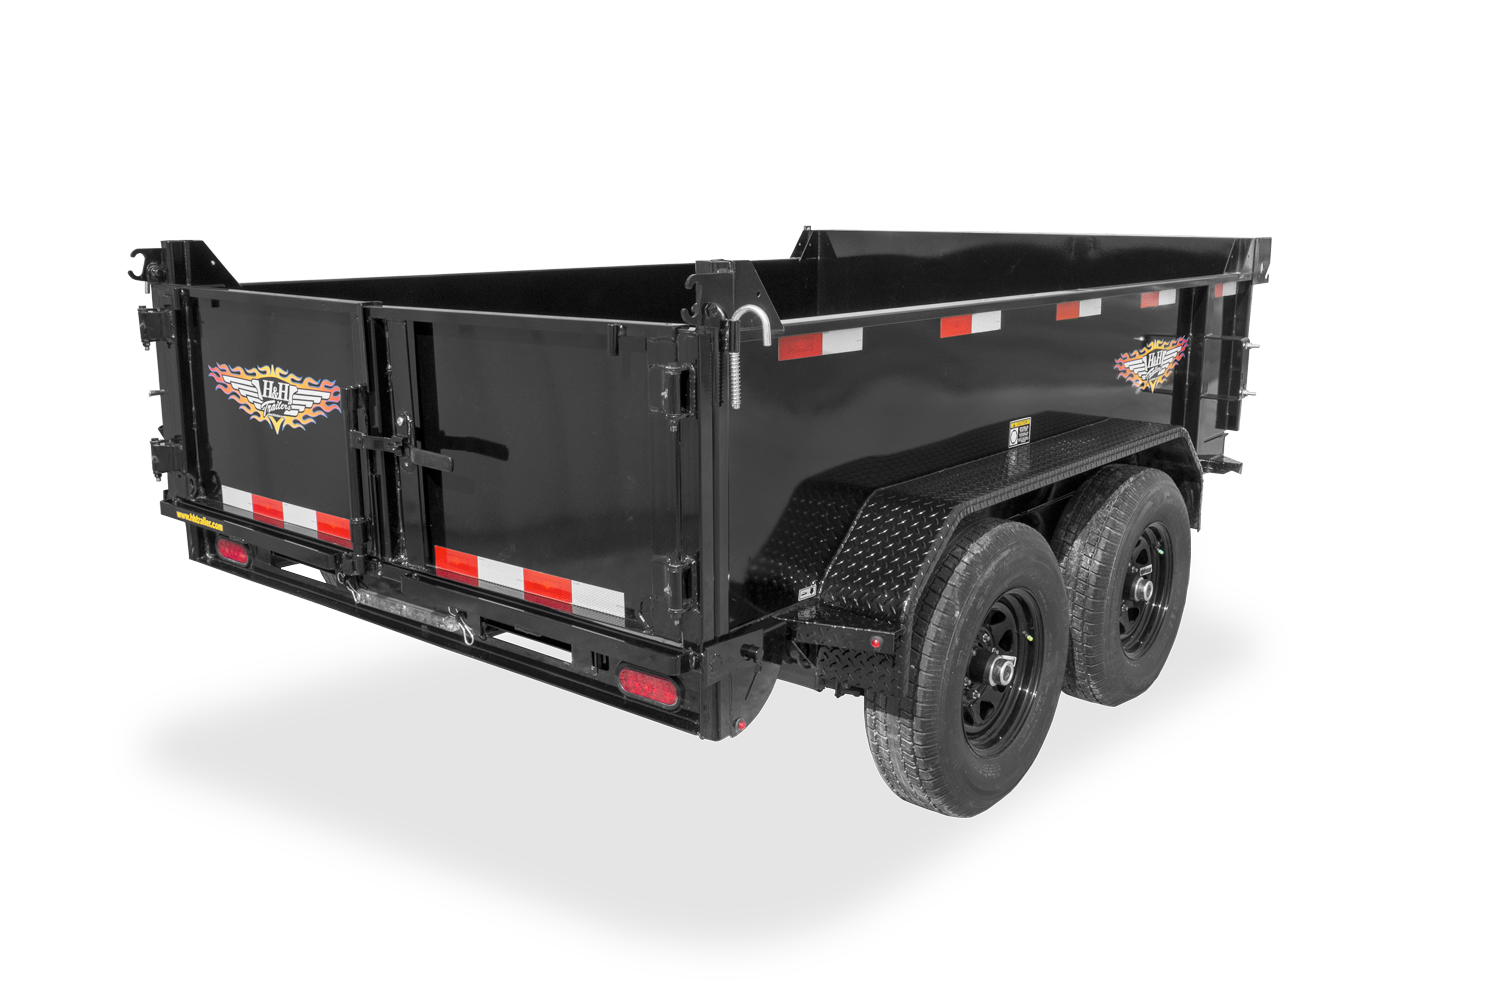 HH Trailer | Products | Trailers | Featured Image | Rear View 10K Utility Dump Trailer